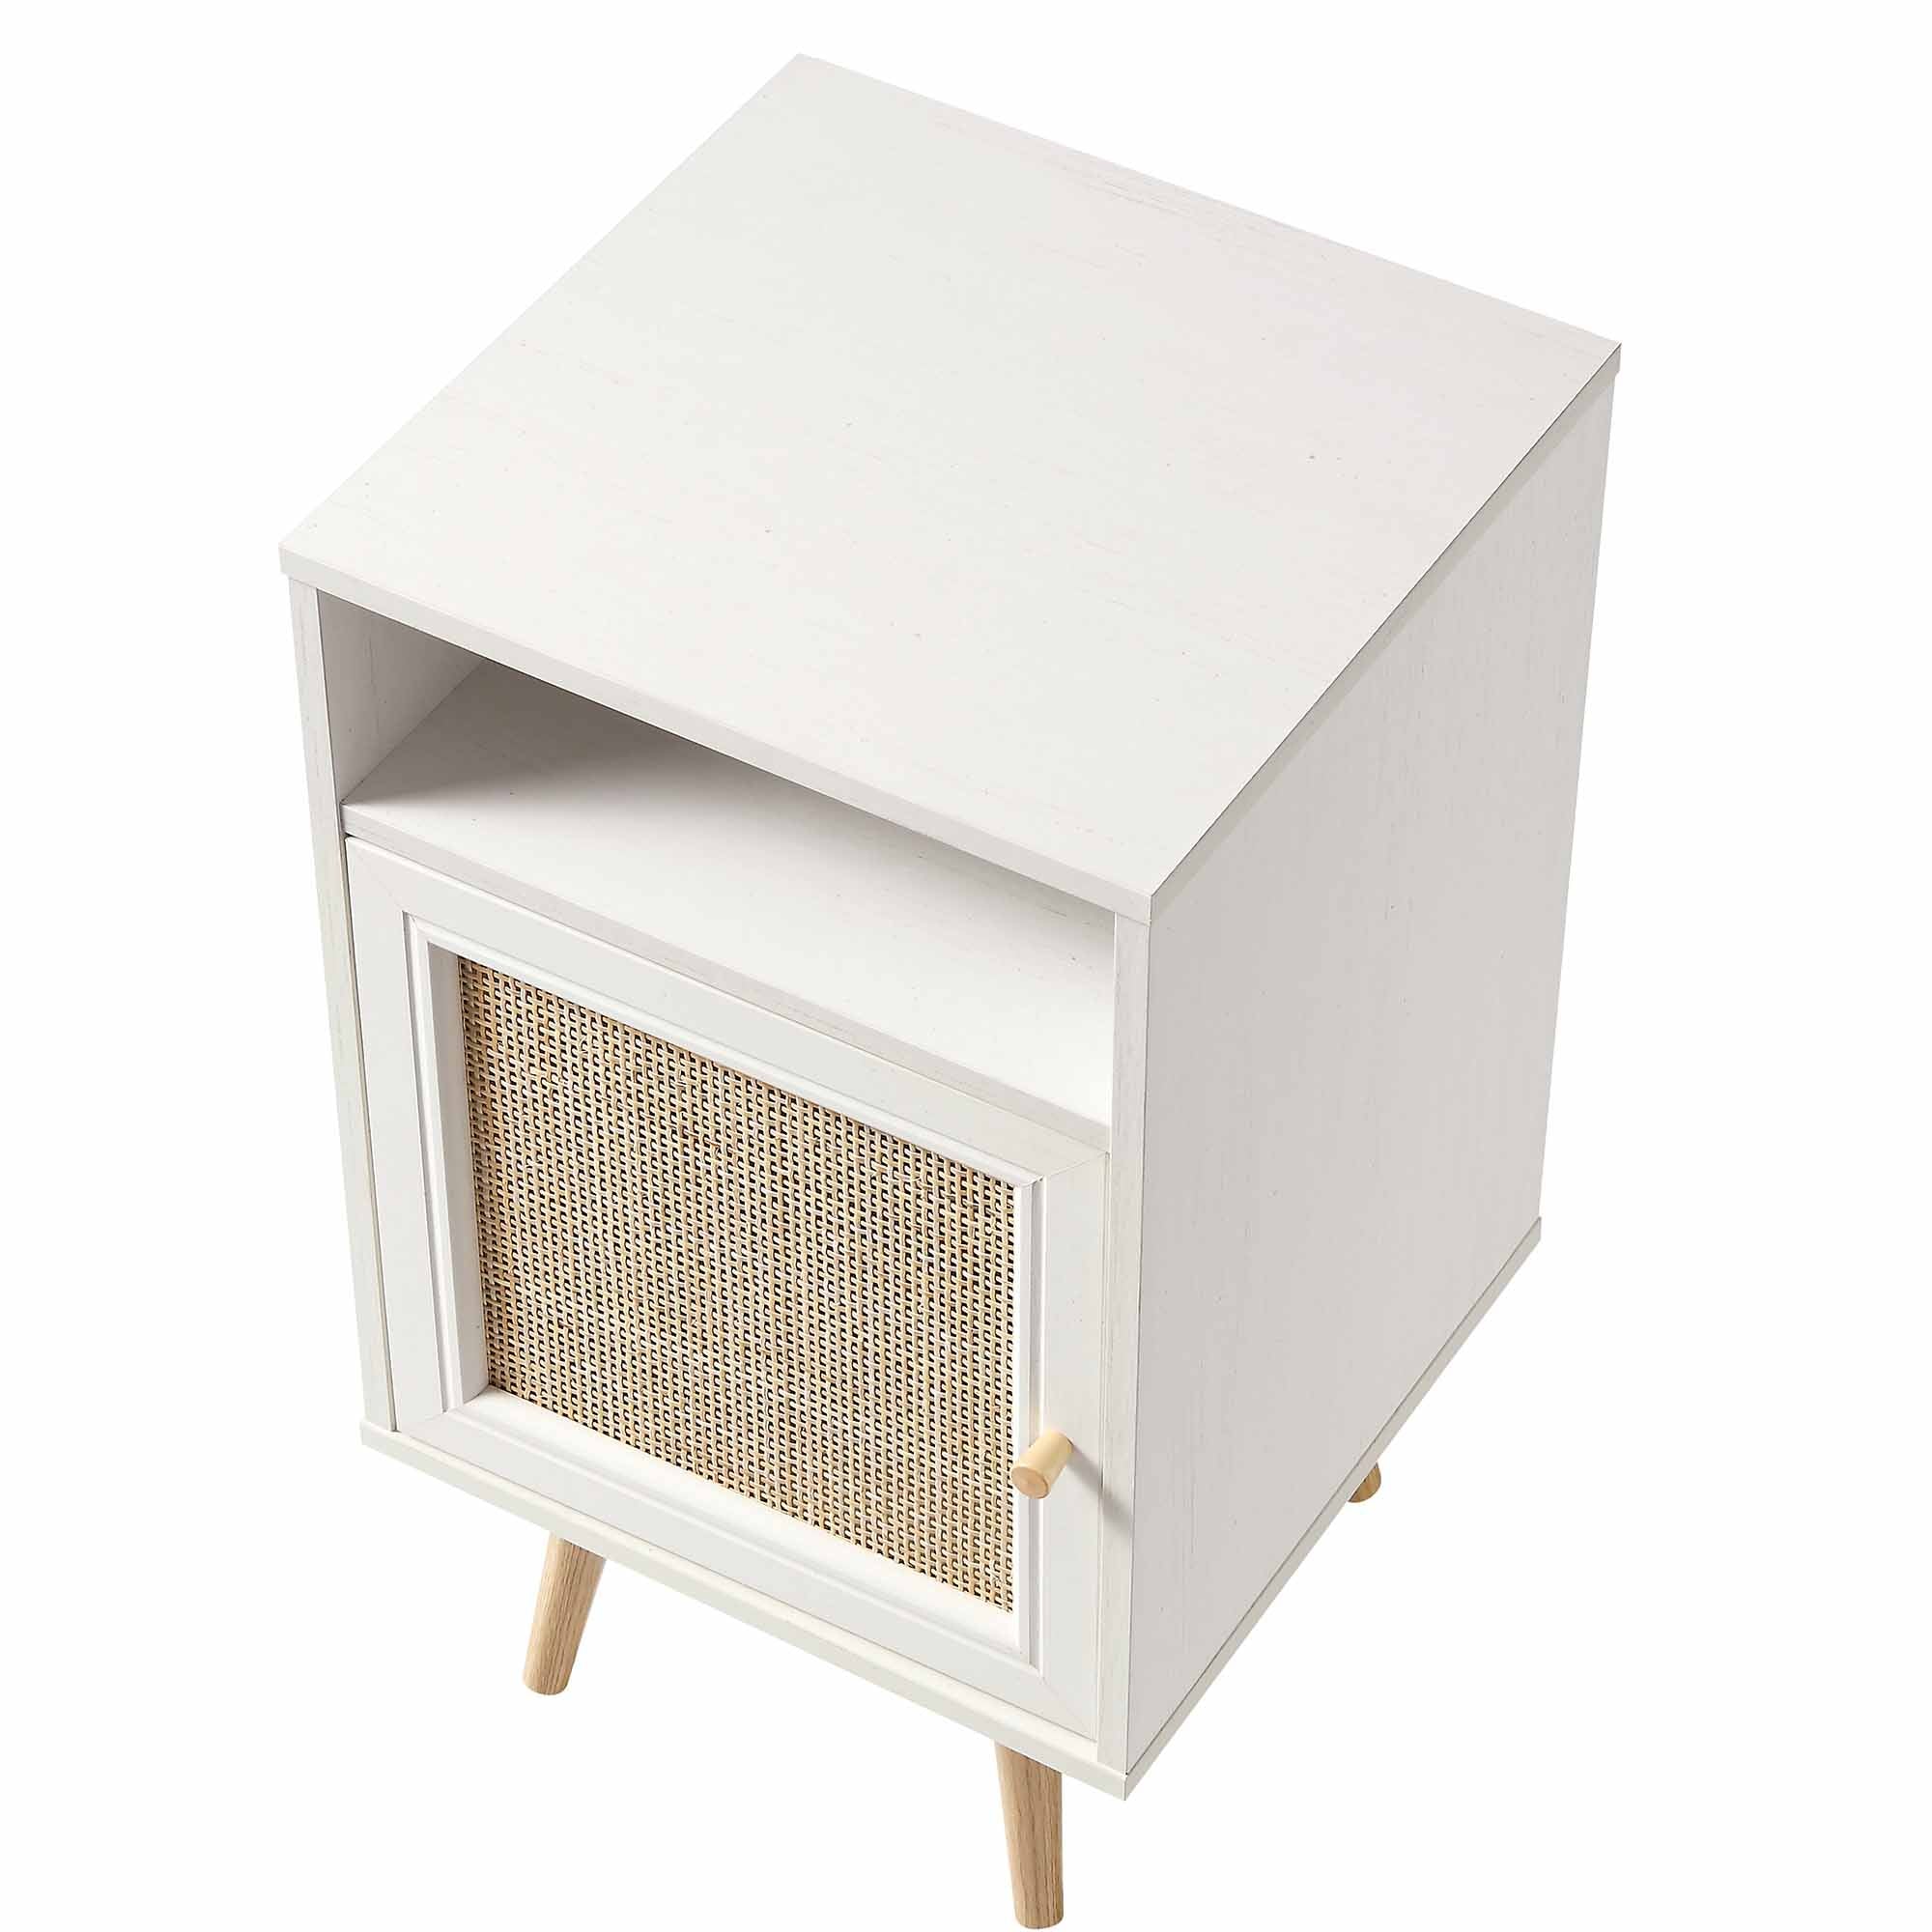 Frances Woven Rattan 1-Door Bedside Table in White